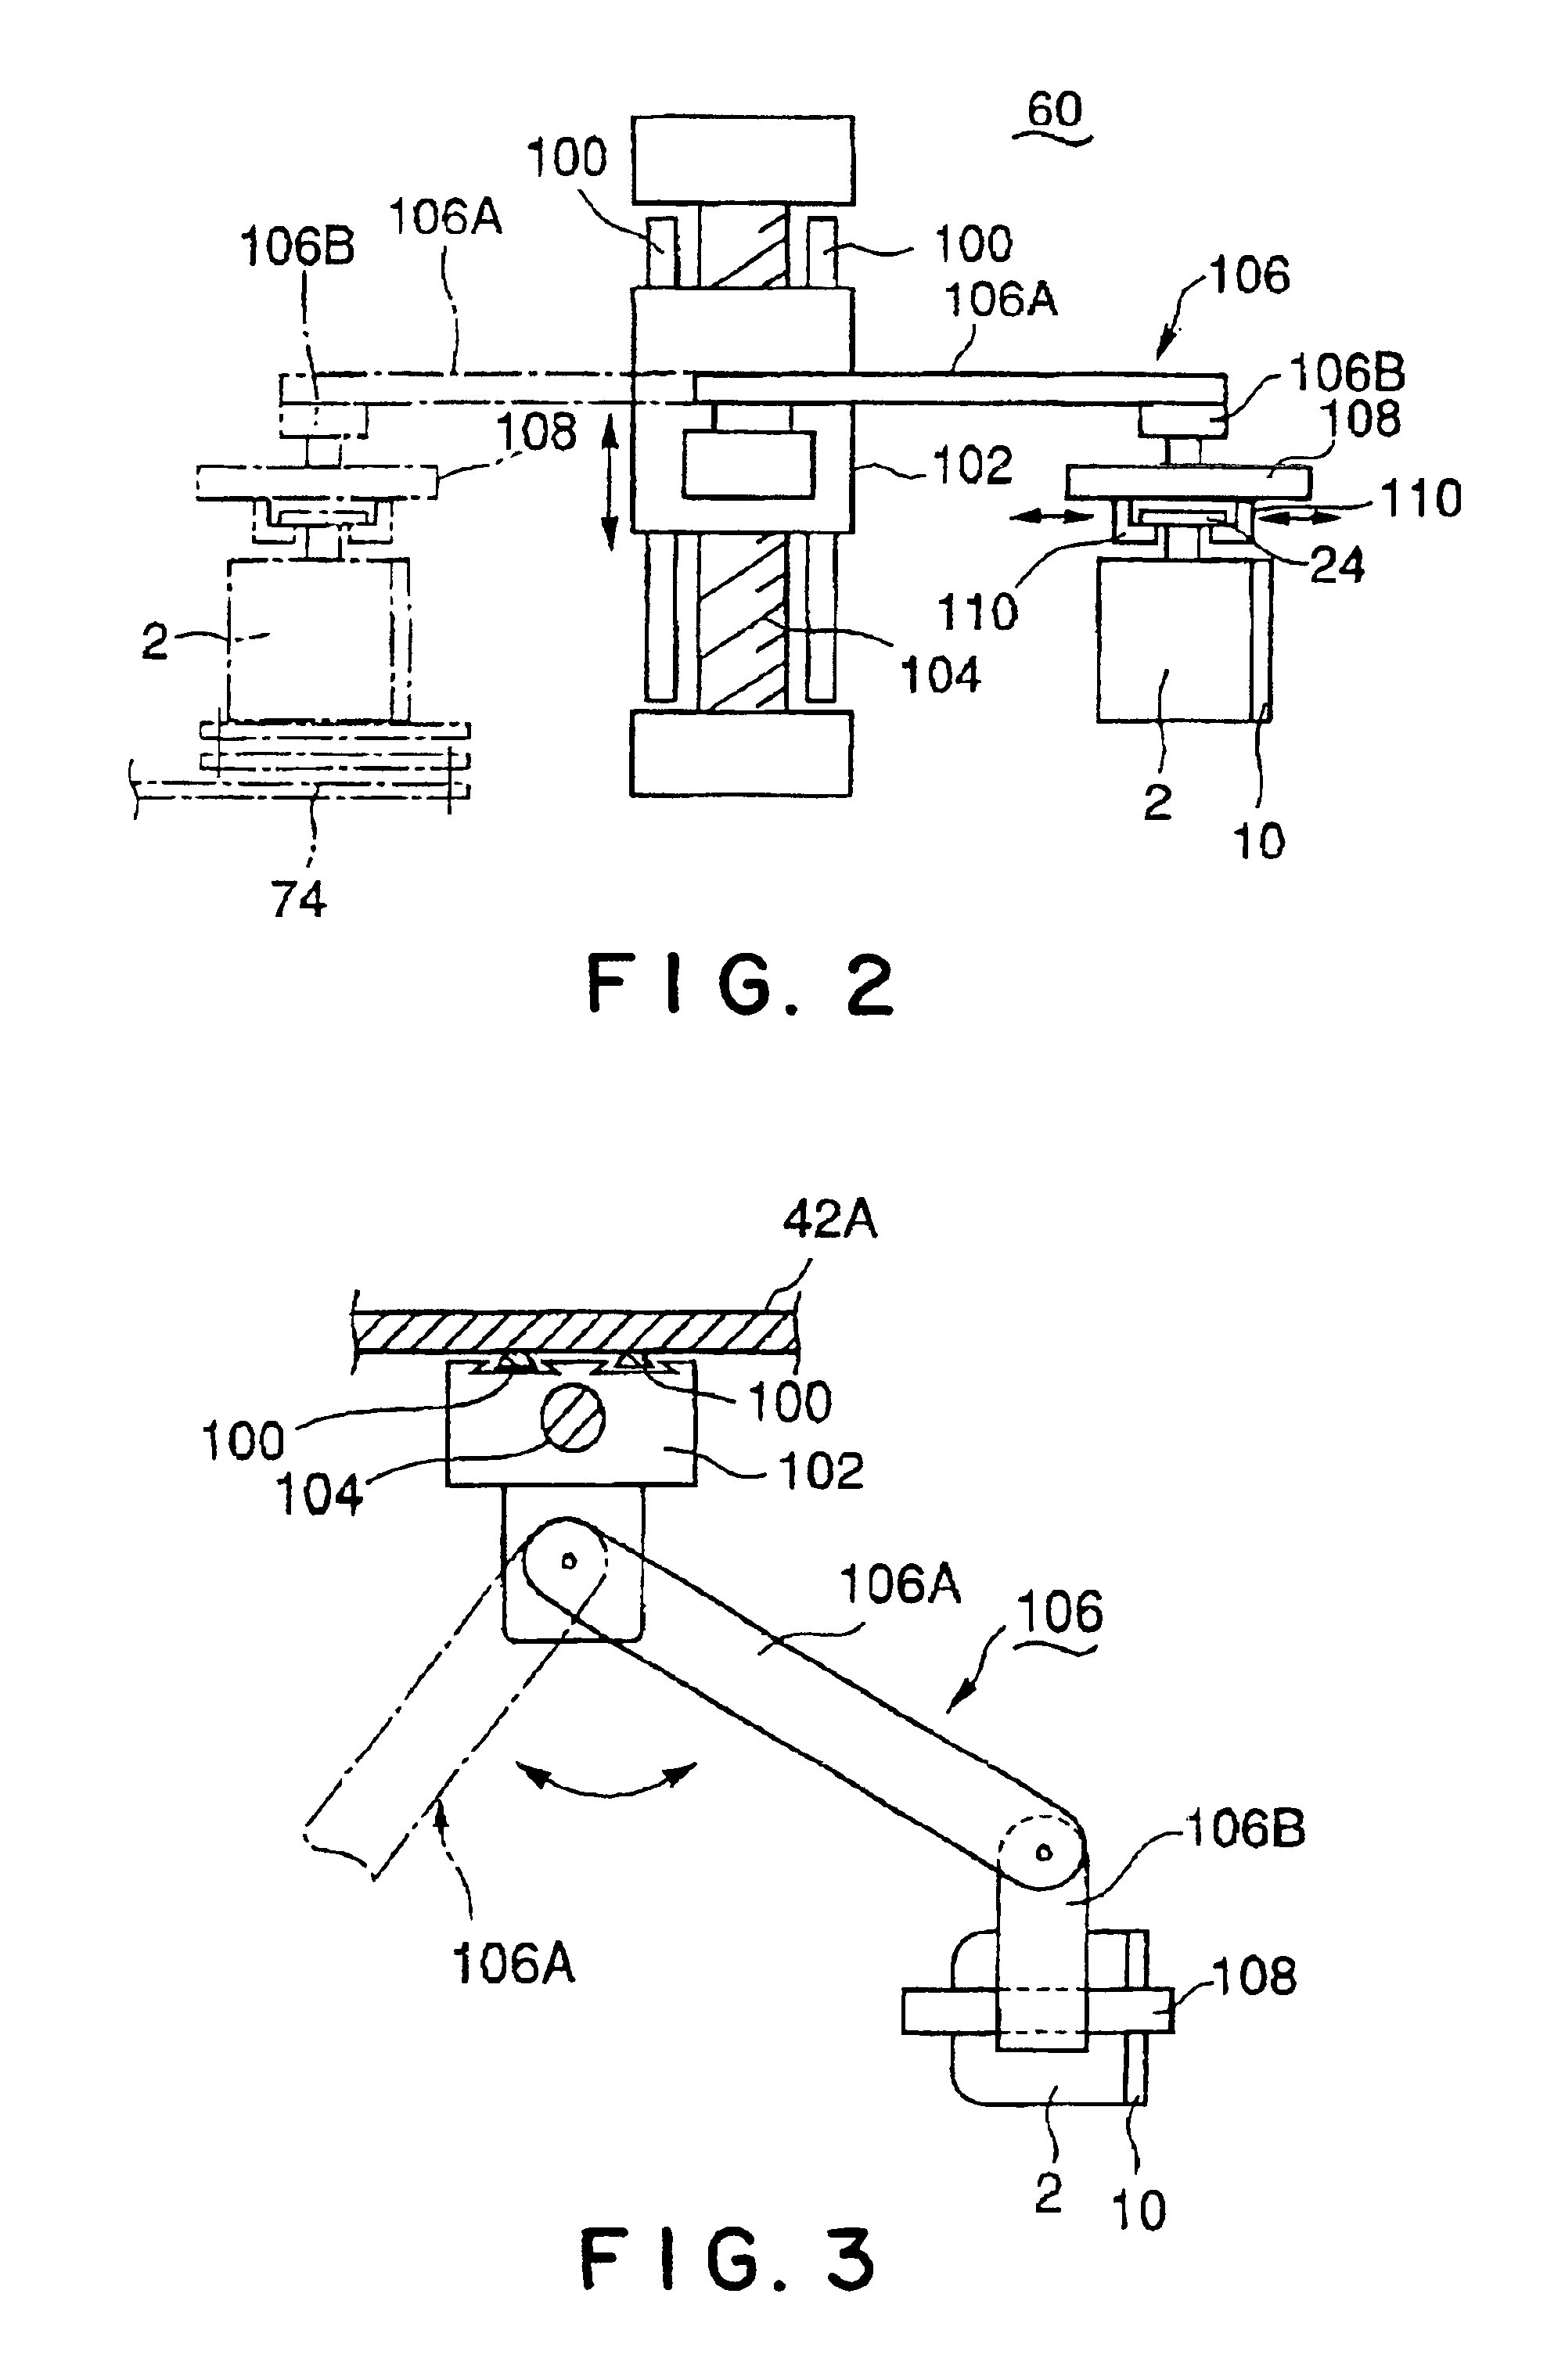 Heat treatment system and a method for cooling a loading chamber